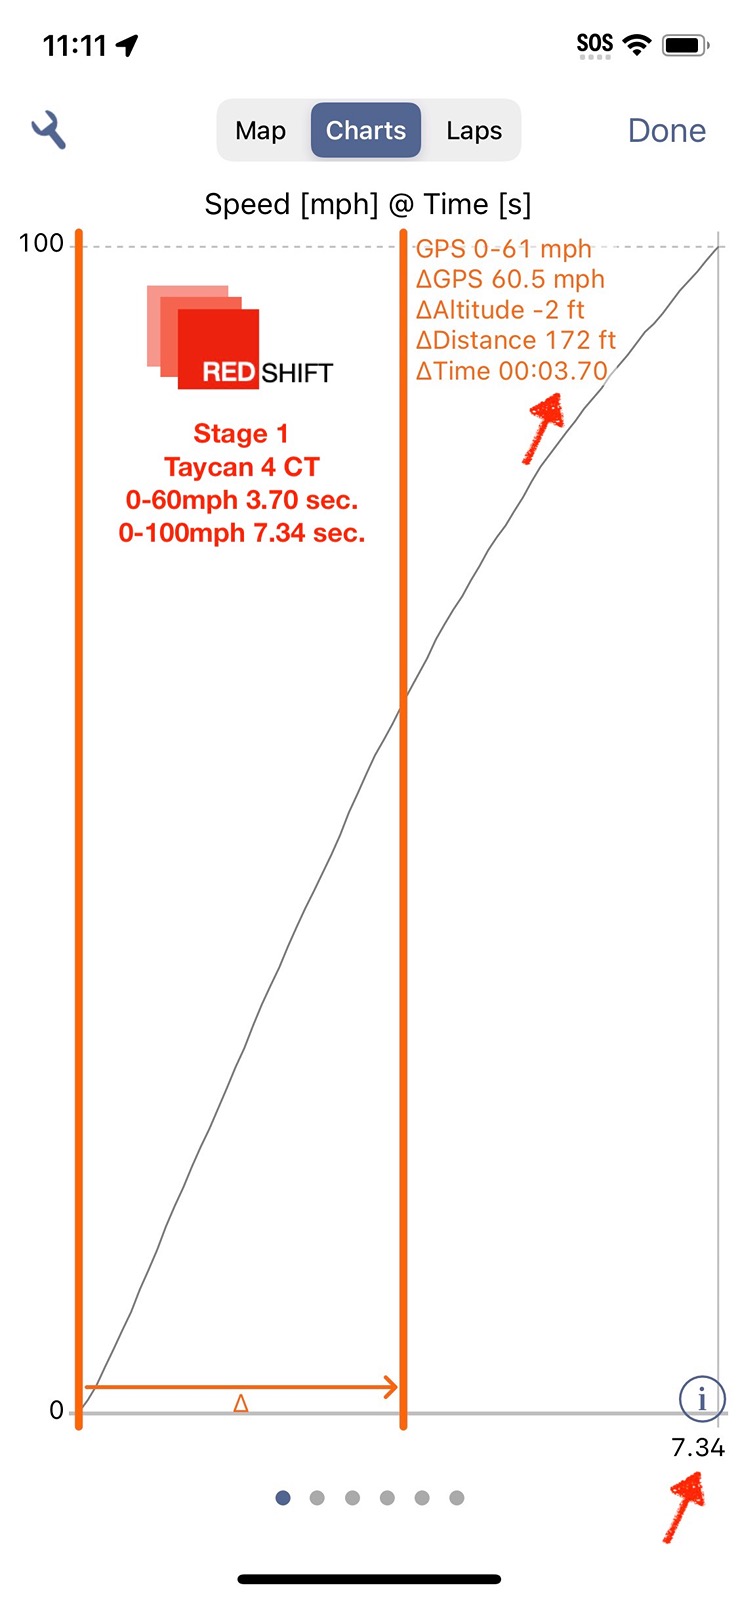 Porsche Taycan Redshift Performance - Taycan 4 CT Acceleration Measurements Before & After Upgrade redshift_stage1_taycan4CT_0_60_0_100_accell